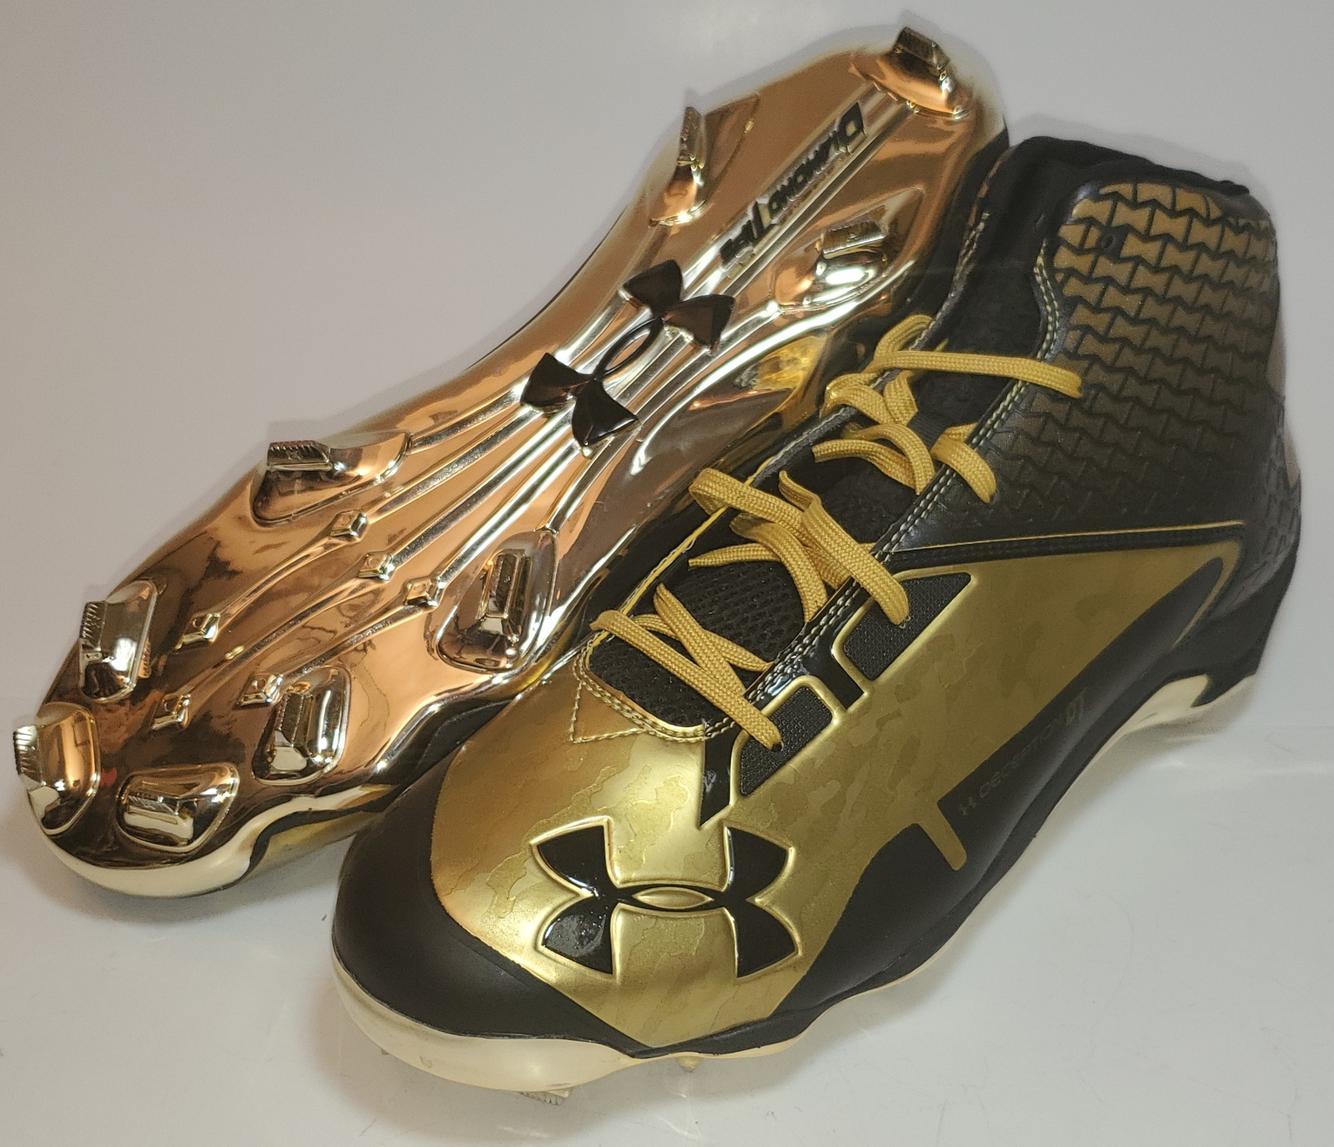 Under Armour NEW Gold Football Cleats Size 14 Art 1289775-700 